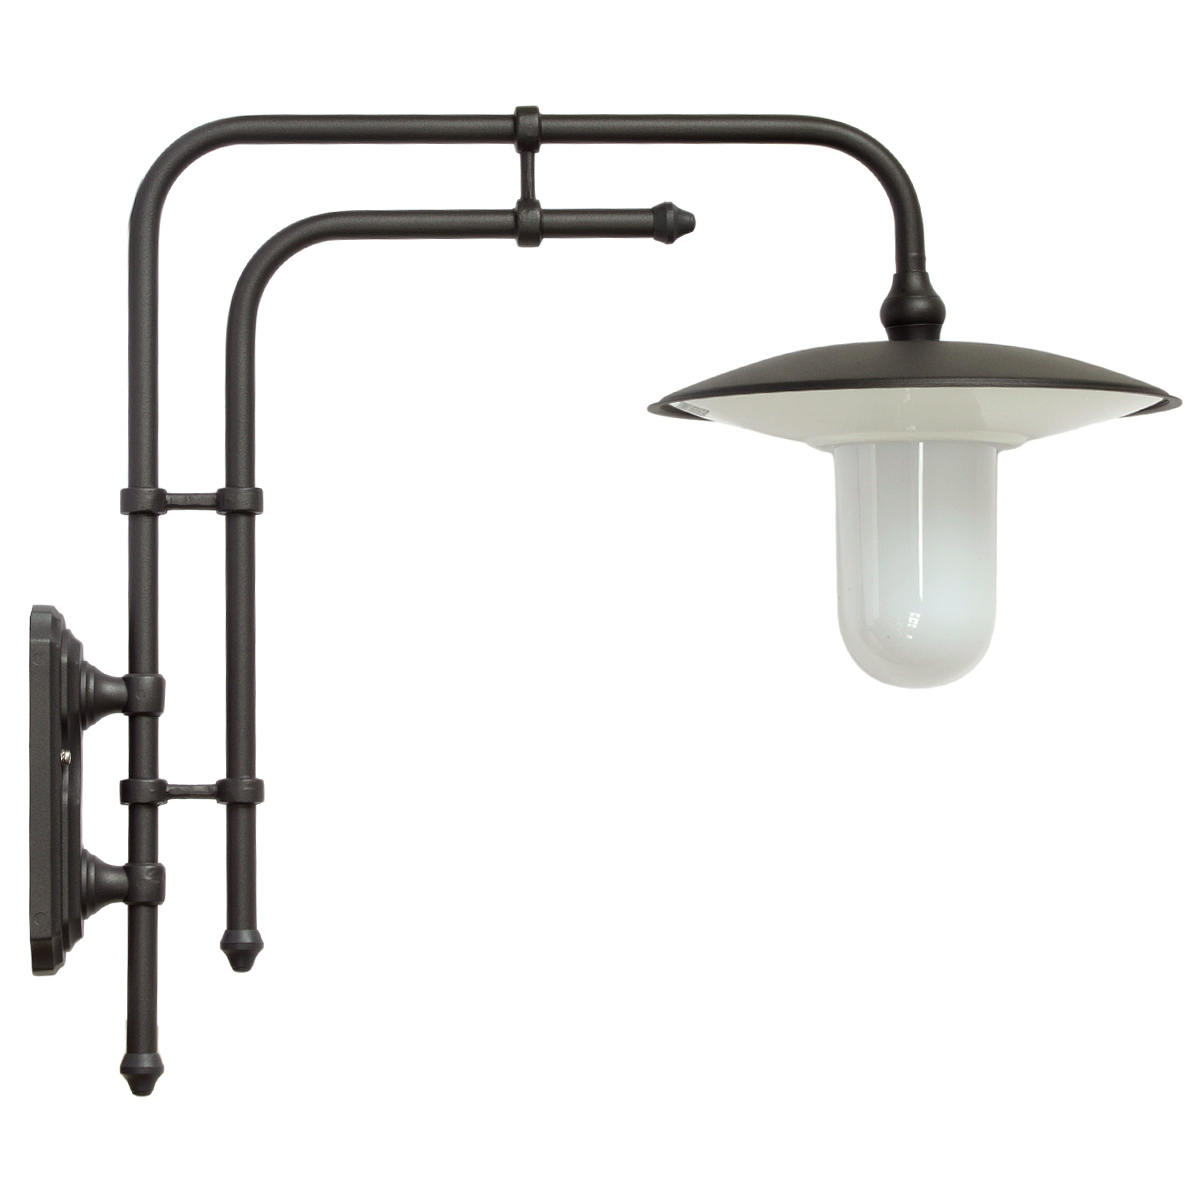 Large Wall Light for Outdoors with Double-Mast Bracket